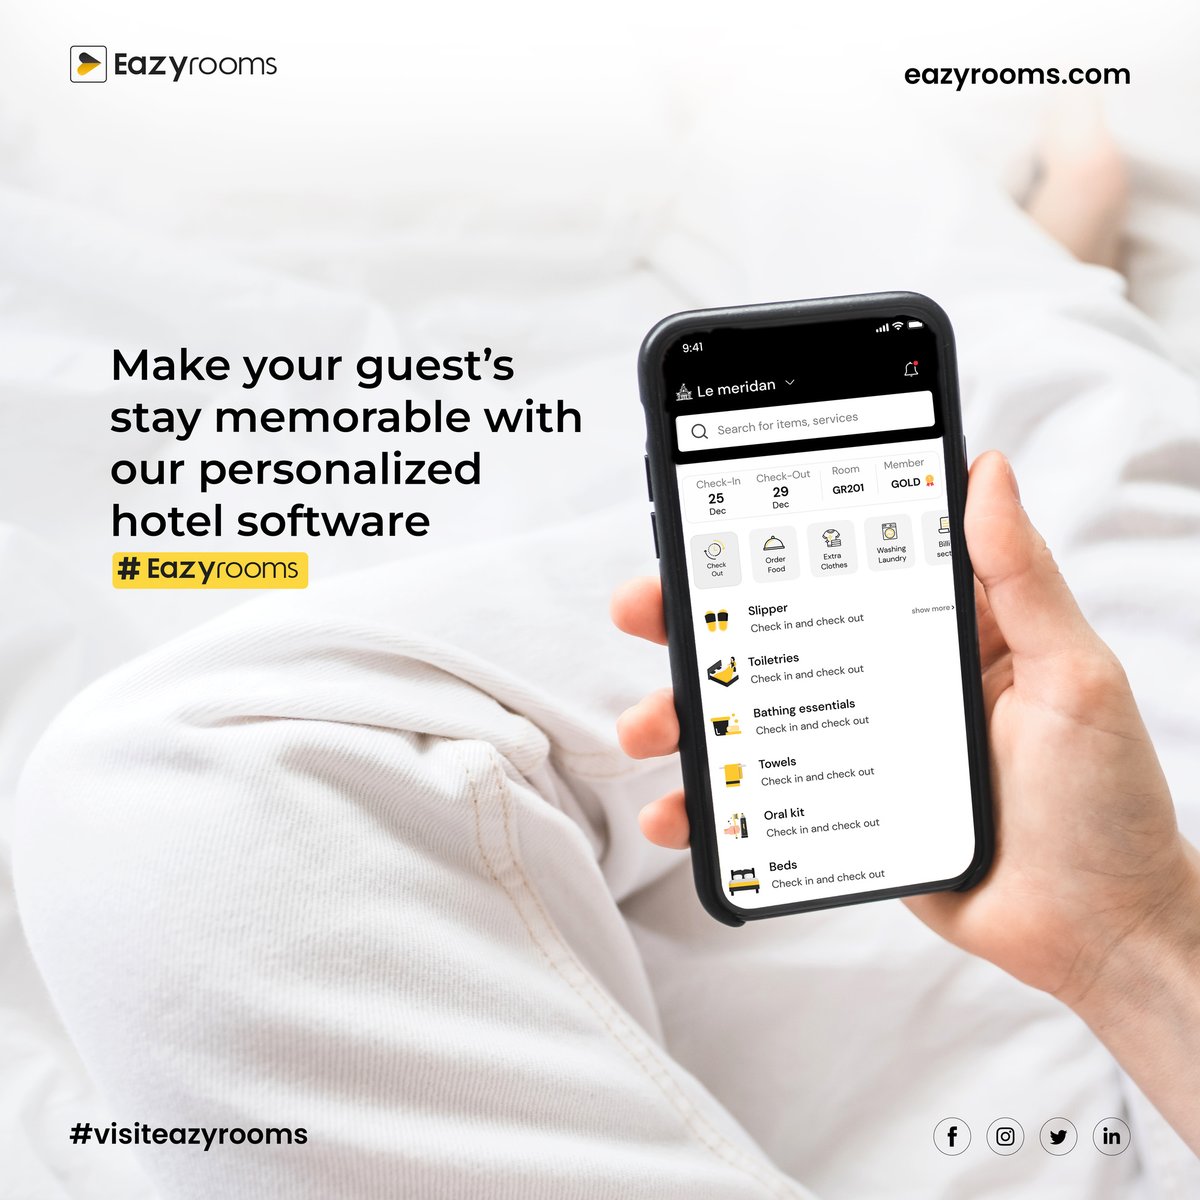 Make your guests feel right at home with our personalized hotel software - @eazyrooms! 
.
.
.
.
.
#Eazyrooms #hotelguests #hotelowner #hotelownership #hotelgrowth #satisfyguests #happyguests #hotelautomation #hotelmanagement #GuestEngagement #Guestsatisfaction